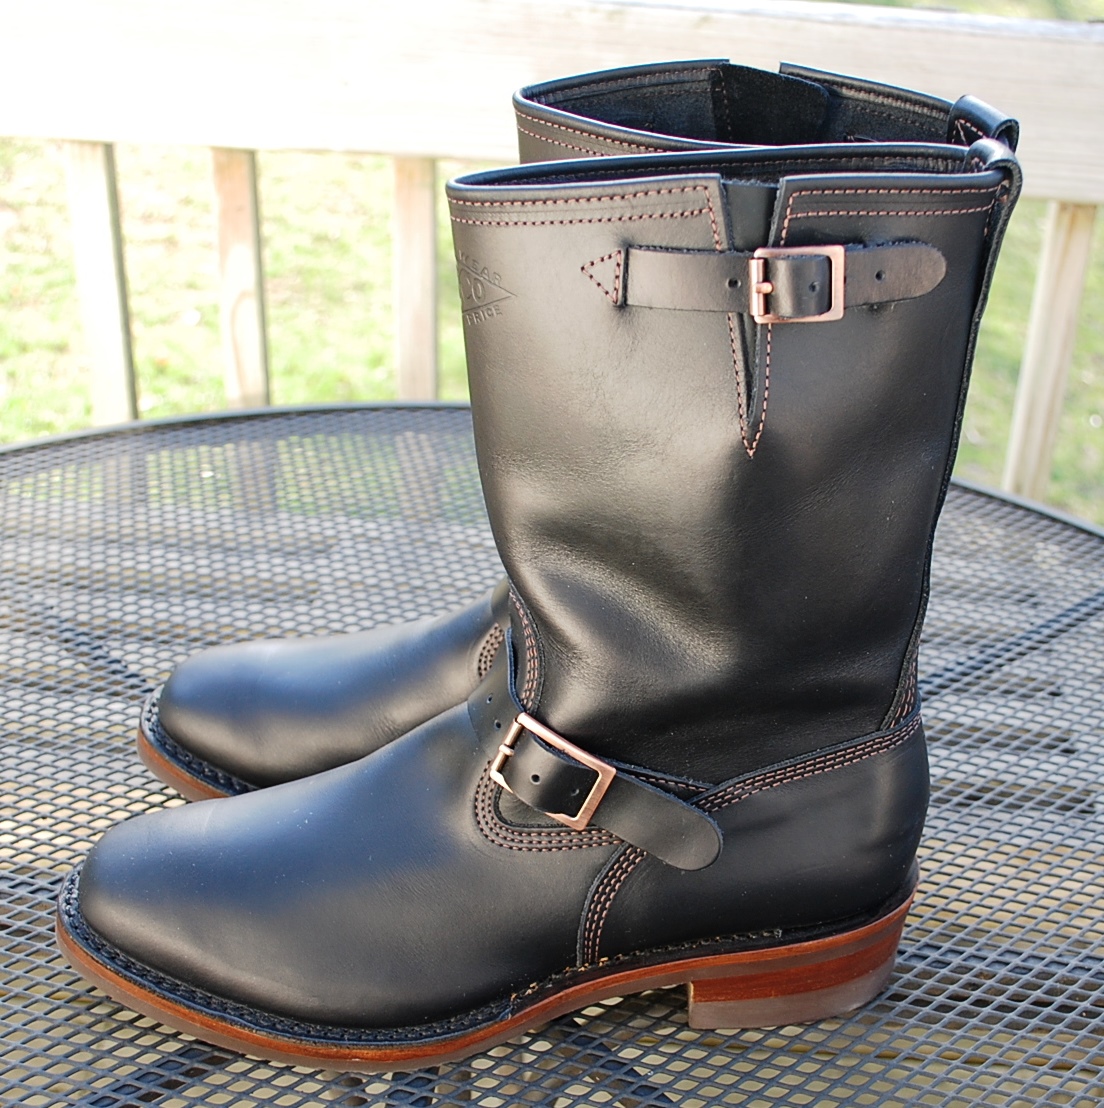 Wesco Boss Black Tie Domain Boots 12D | The Fedora Lounge